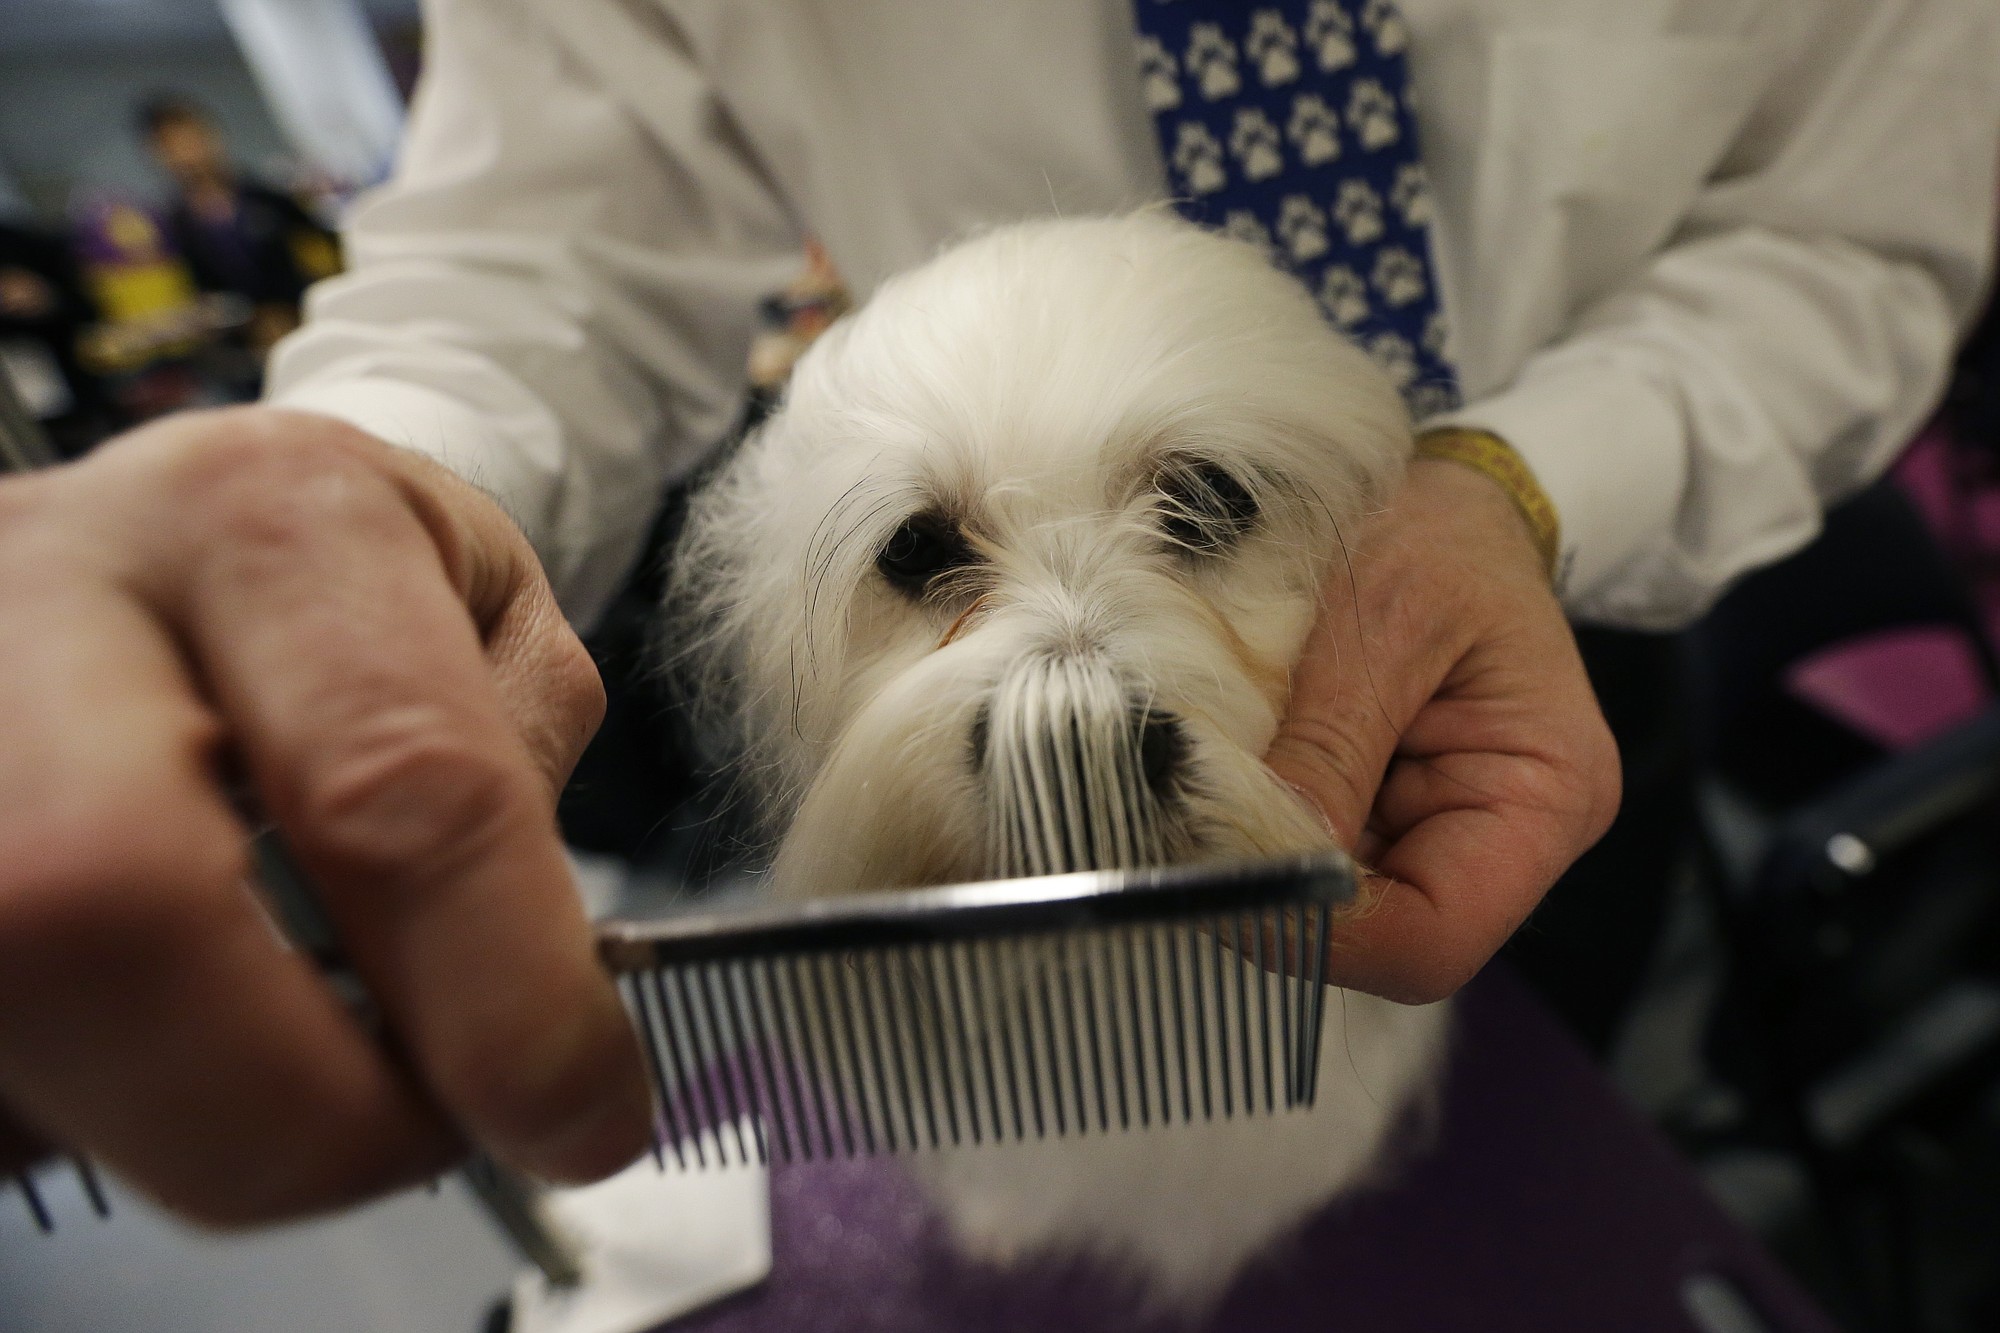 Victor Helu, of Bohemia, N.Y., grooms Panda, a Lowchen, in the benching area of the Westminster Kennel Club dog show Monday at Madison Square Garden in New York.